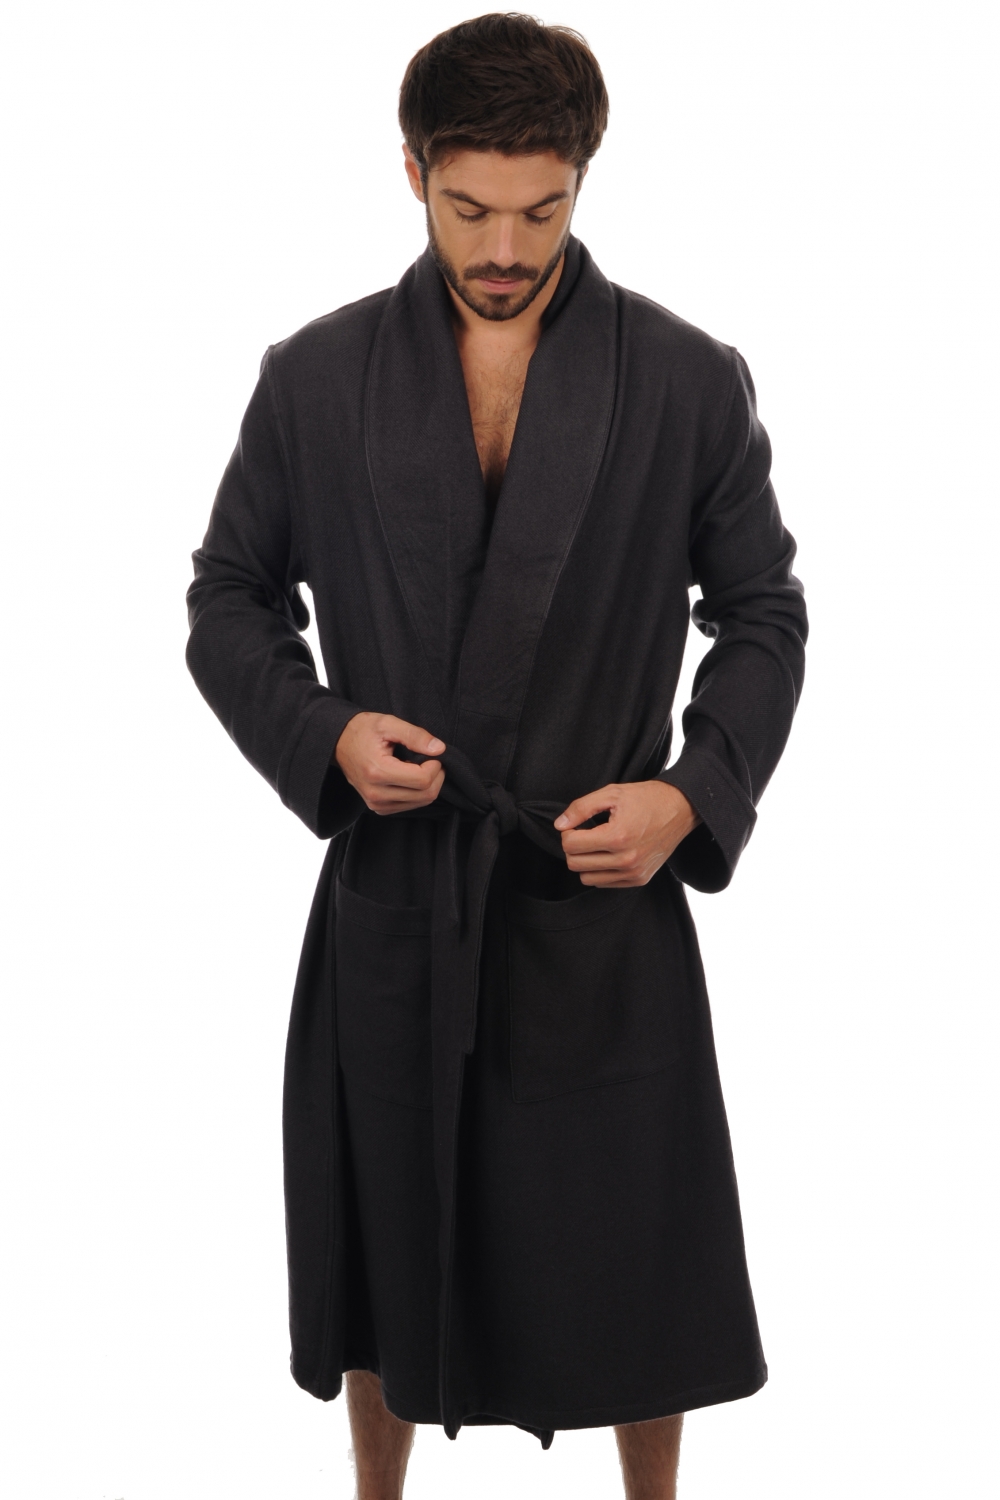 Cachemire robe chambre homme working carbon t3